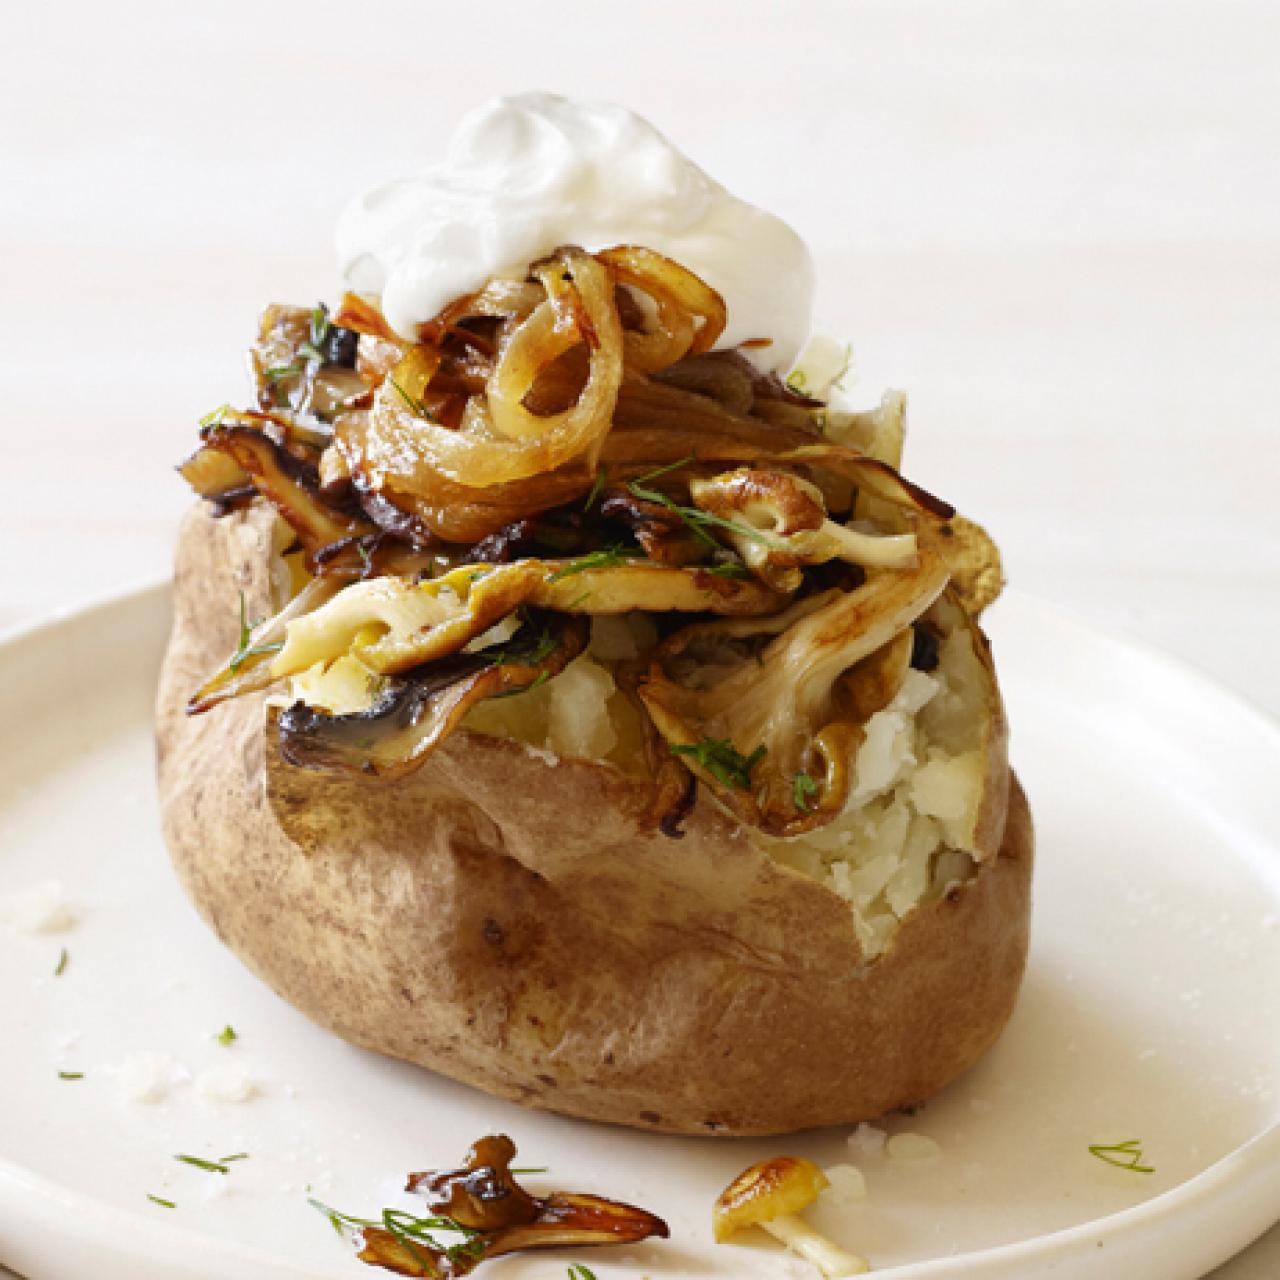 Baked Potato Bar with Healthy Toppings - It's a Veg World After All®